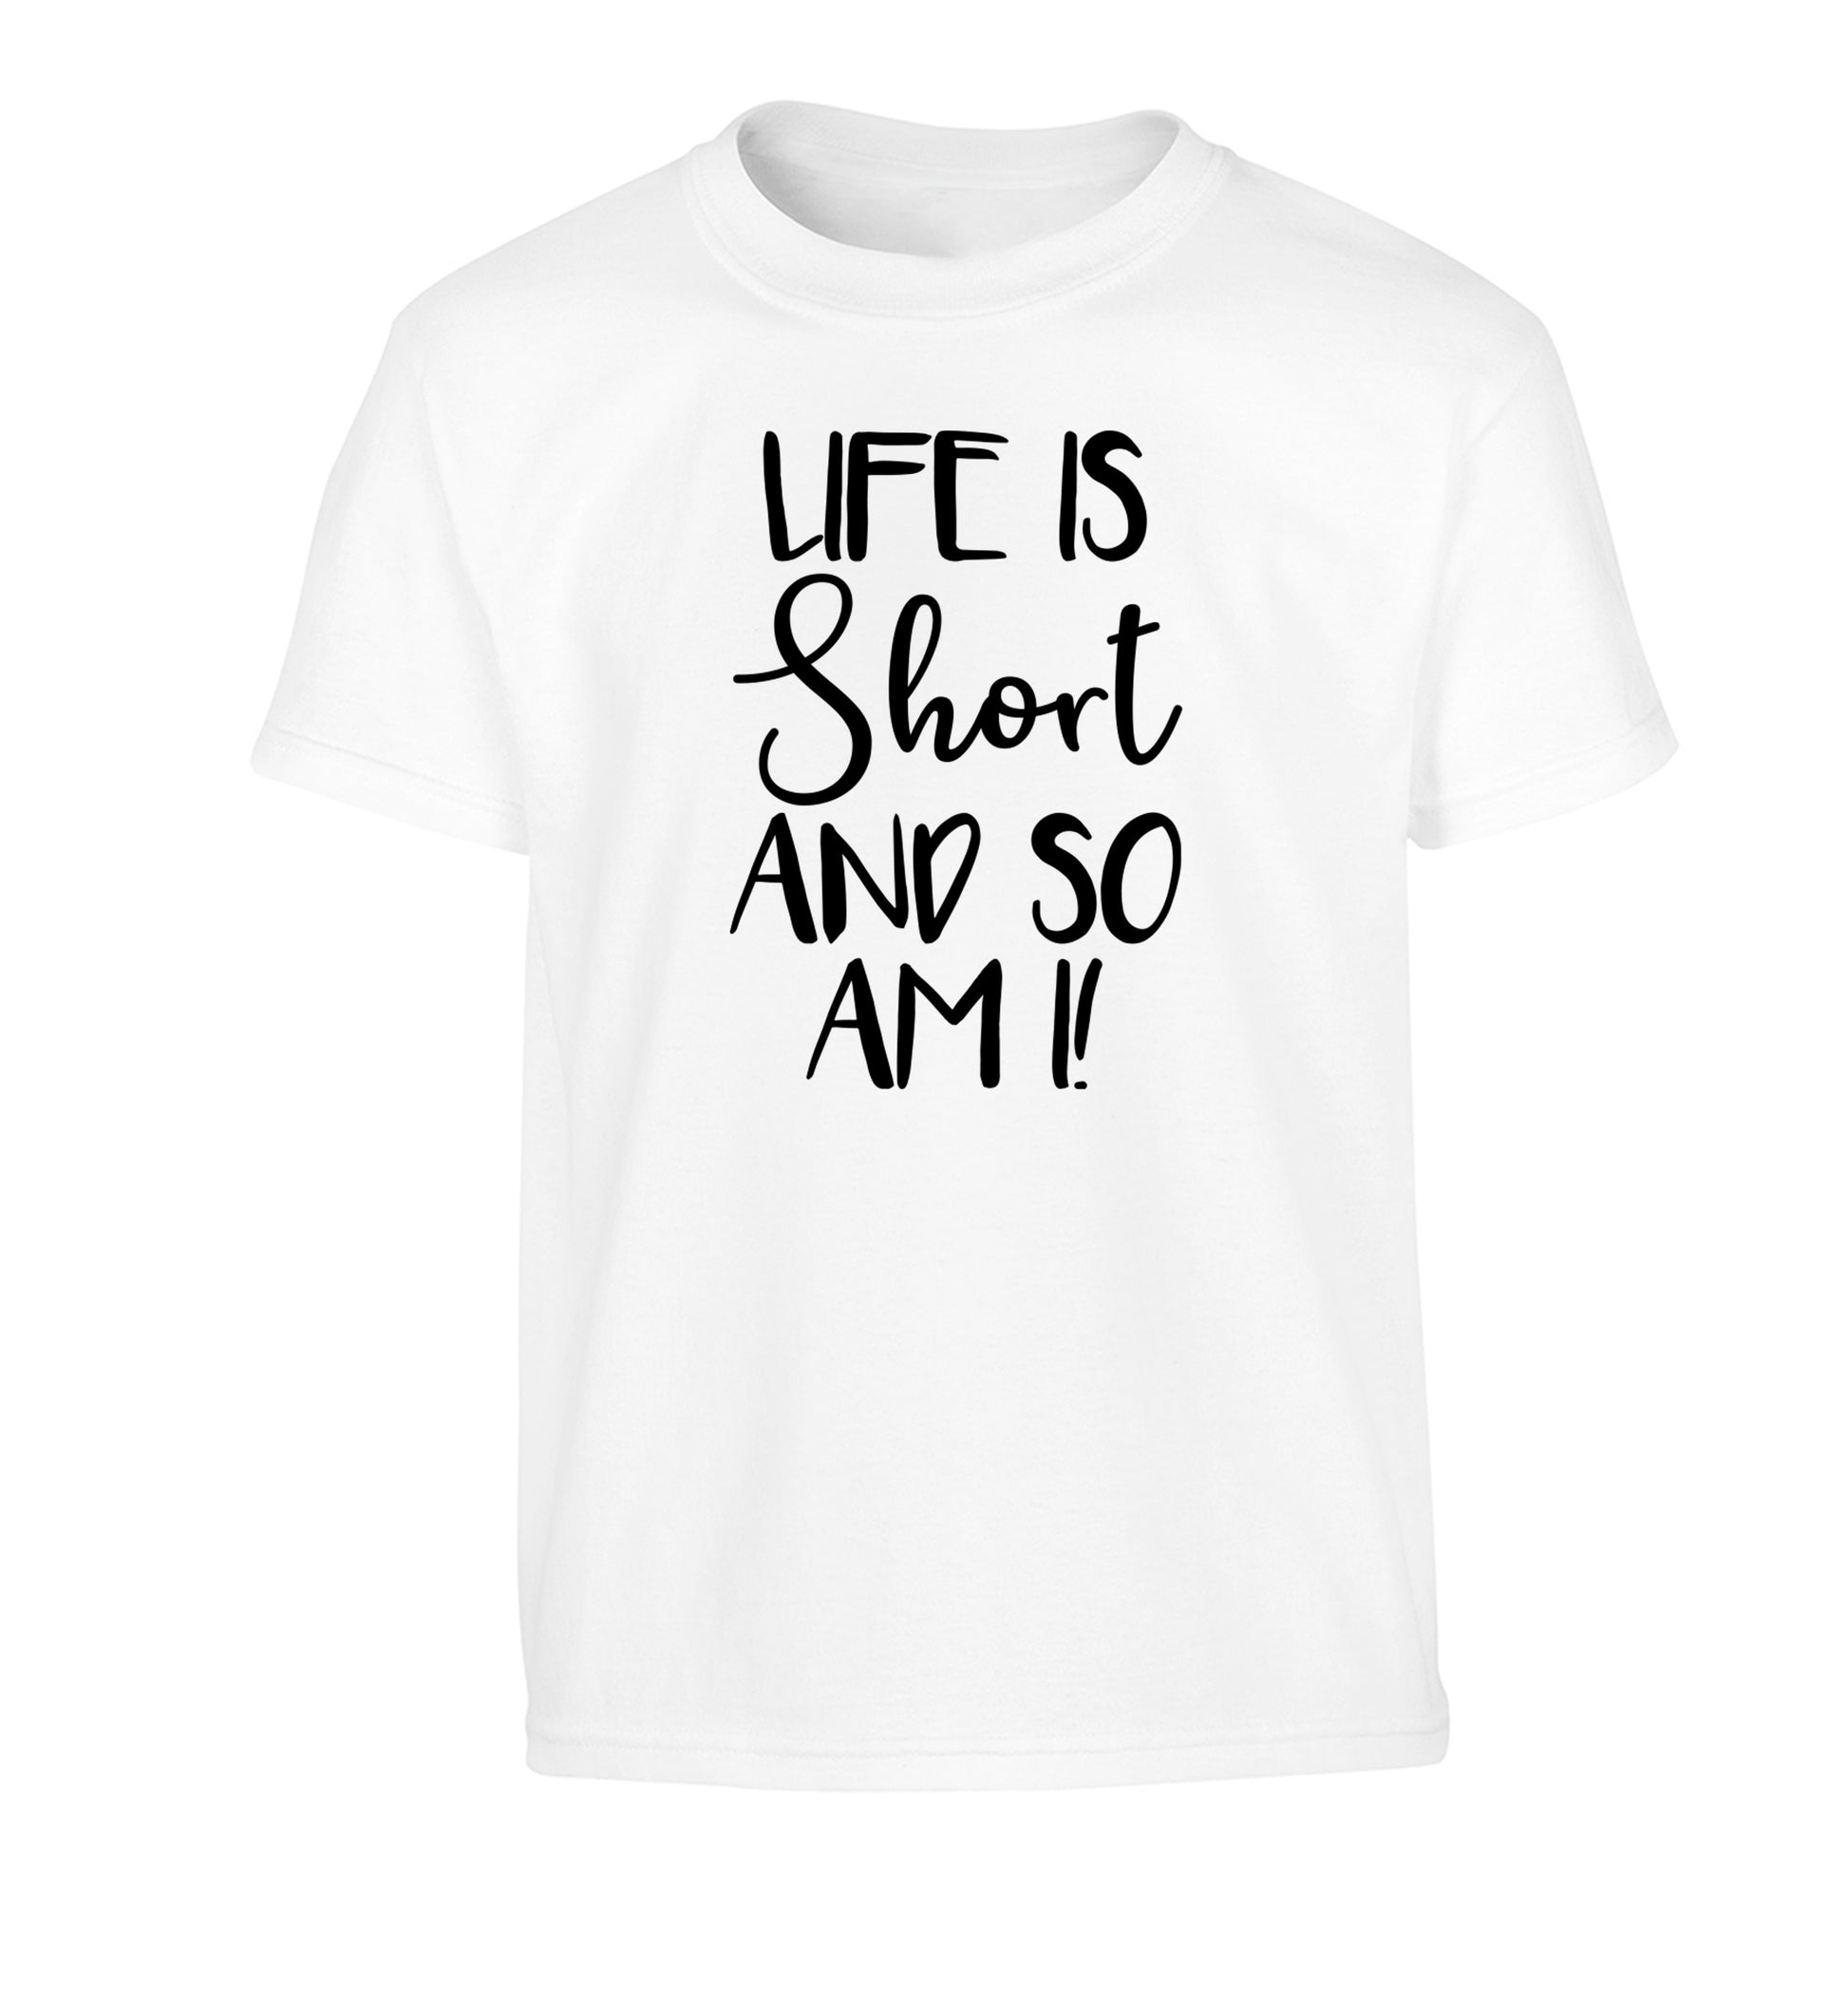 Life is short and so am I! Children's white Tshirt 12-13 Years